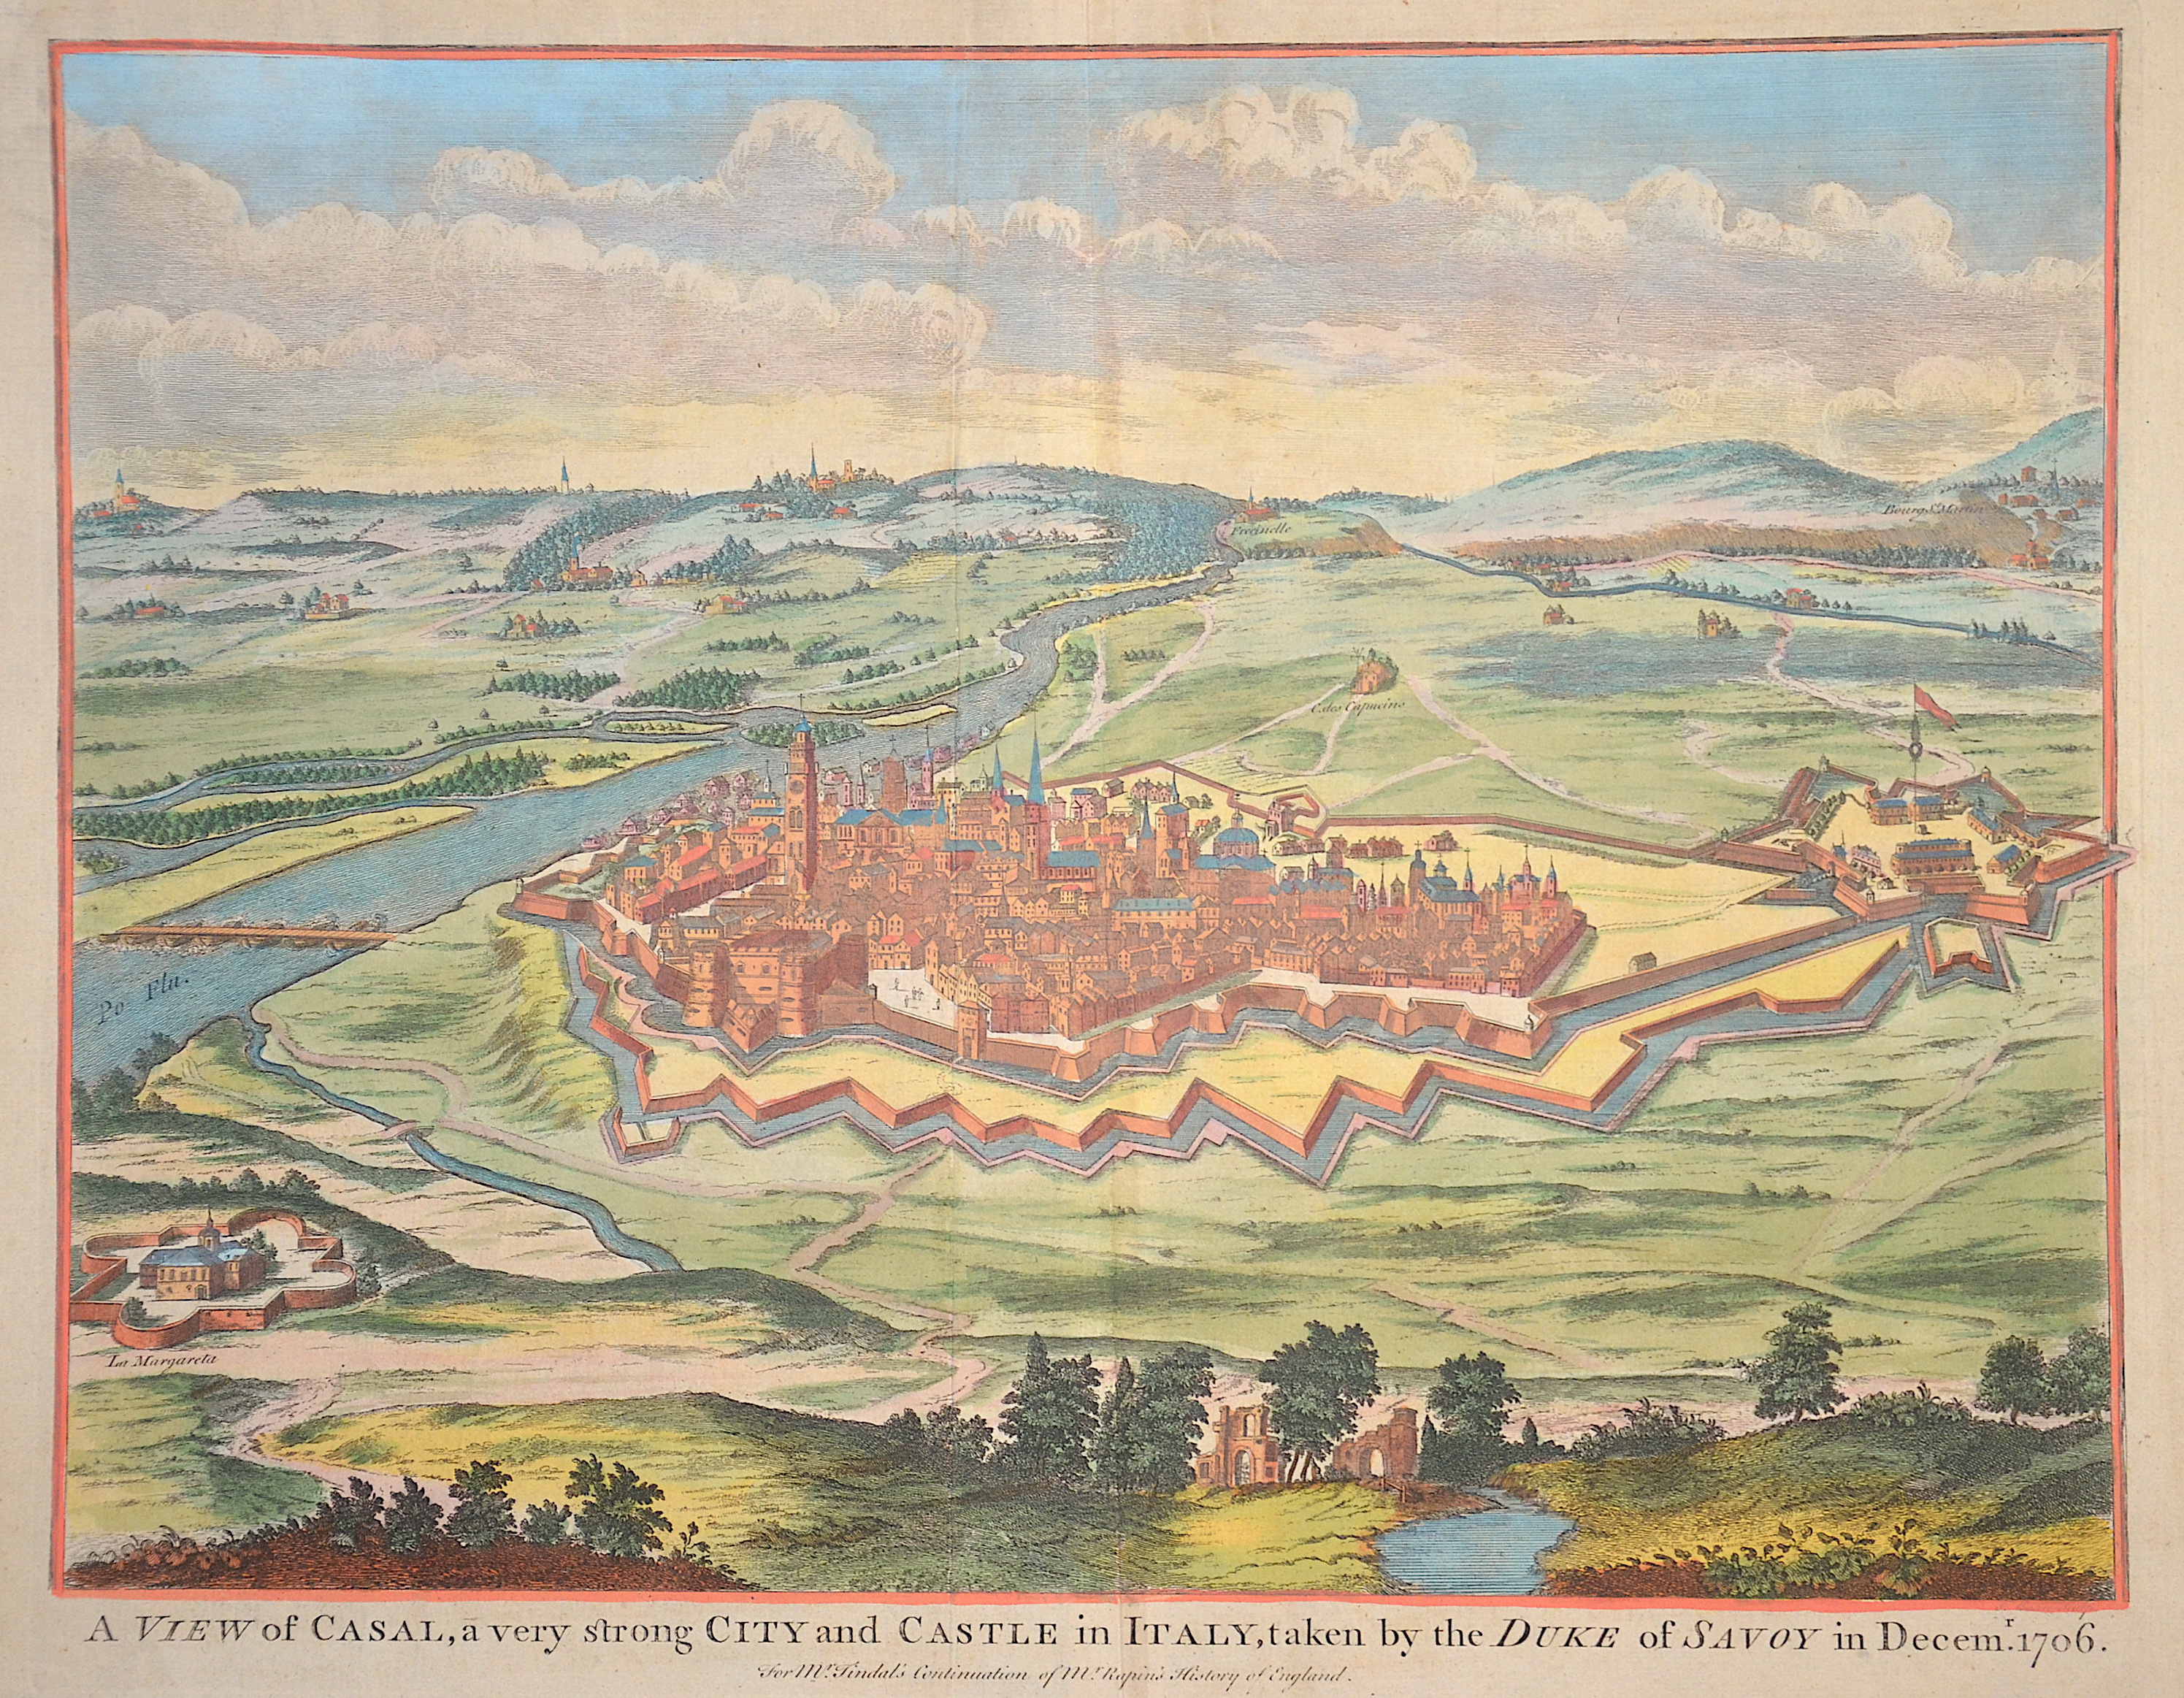 Rapin de Thoyras  A View of Casal, a very strong City and Castle in Italy, taken by the Duke of Savoy in Decemr. 1706.